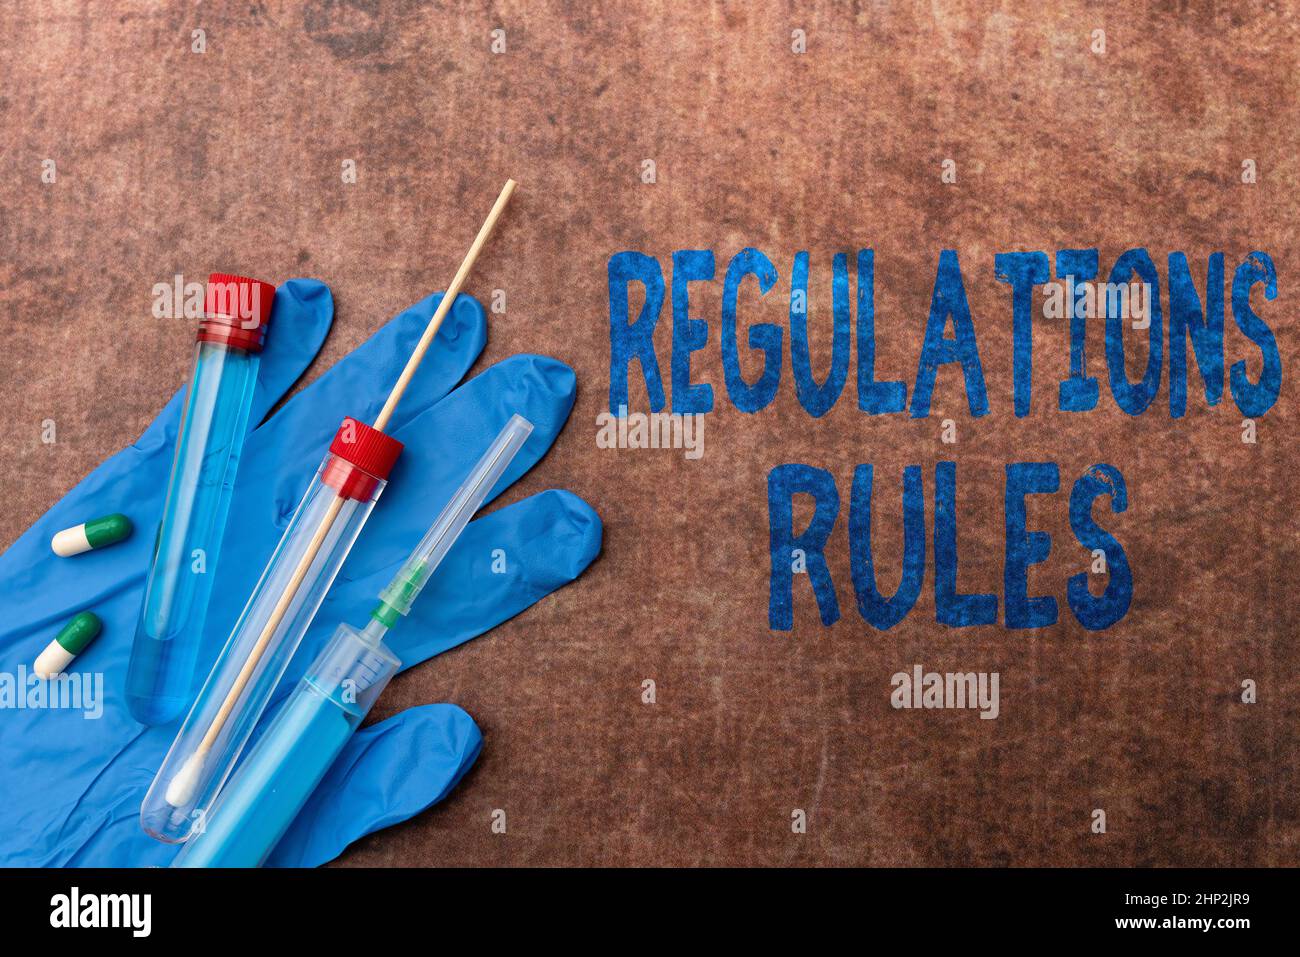 Sign displaying Regulations Rules, Internet Concept Standard Statement Procedure govern to control a conduct Writing Prescription Medicine Laboratory Stock Photo